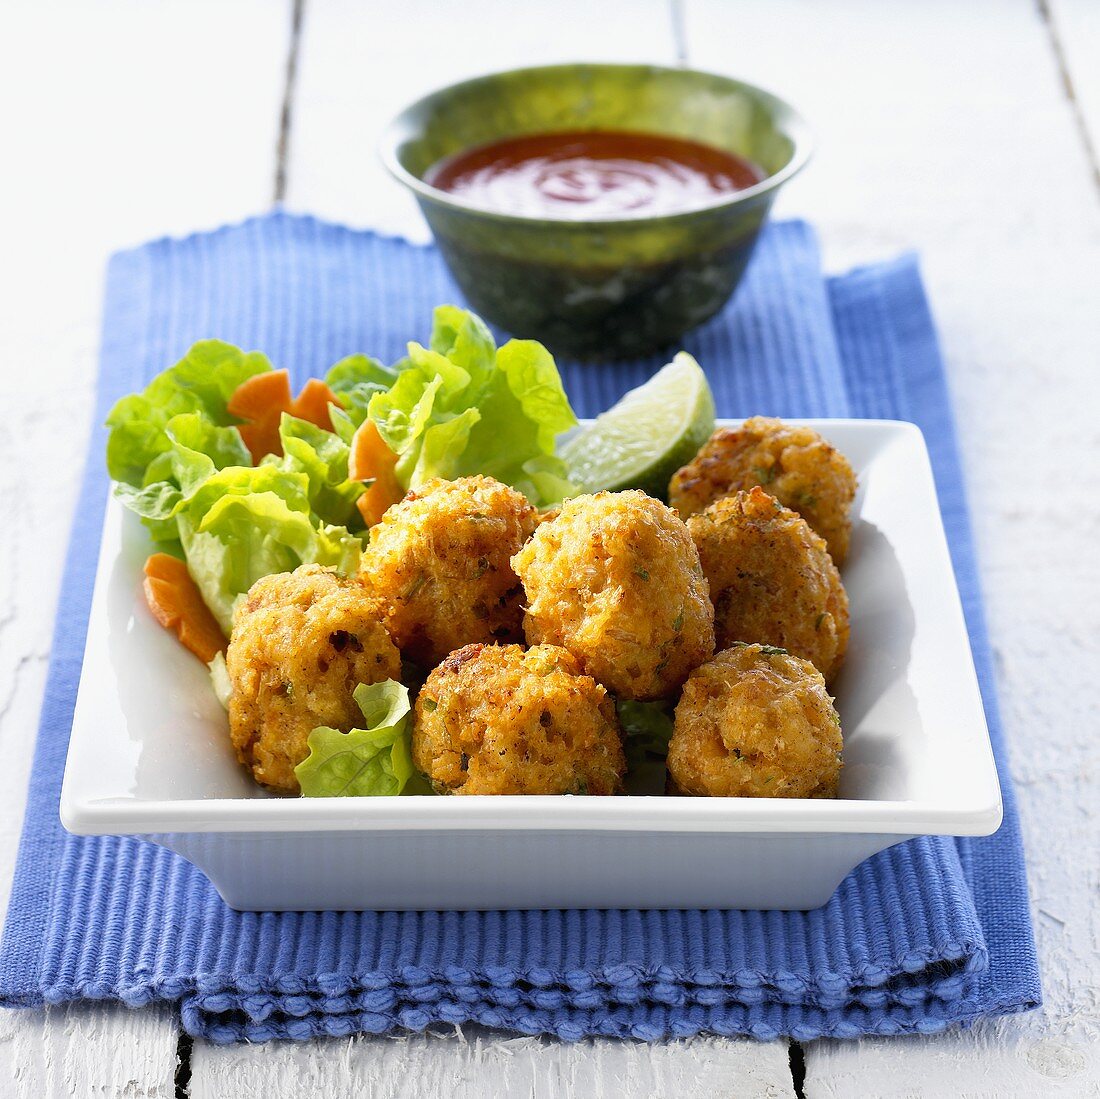 Deep-fried shrimp balls with chili sauce (Indonesia)